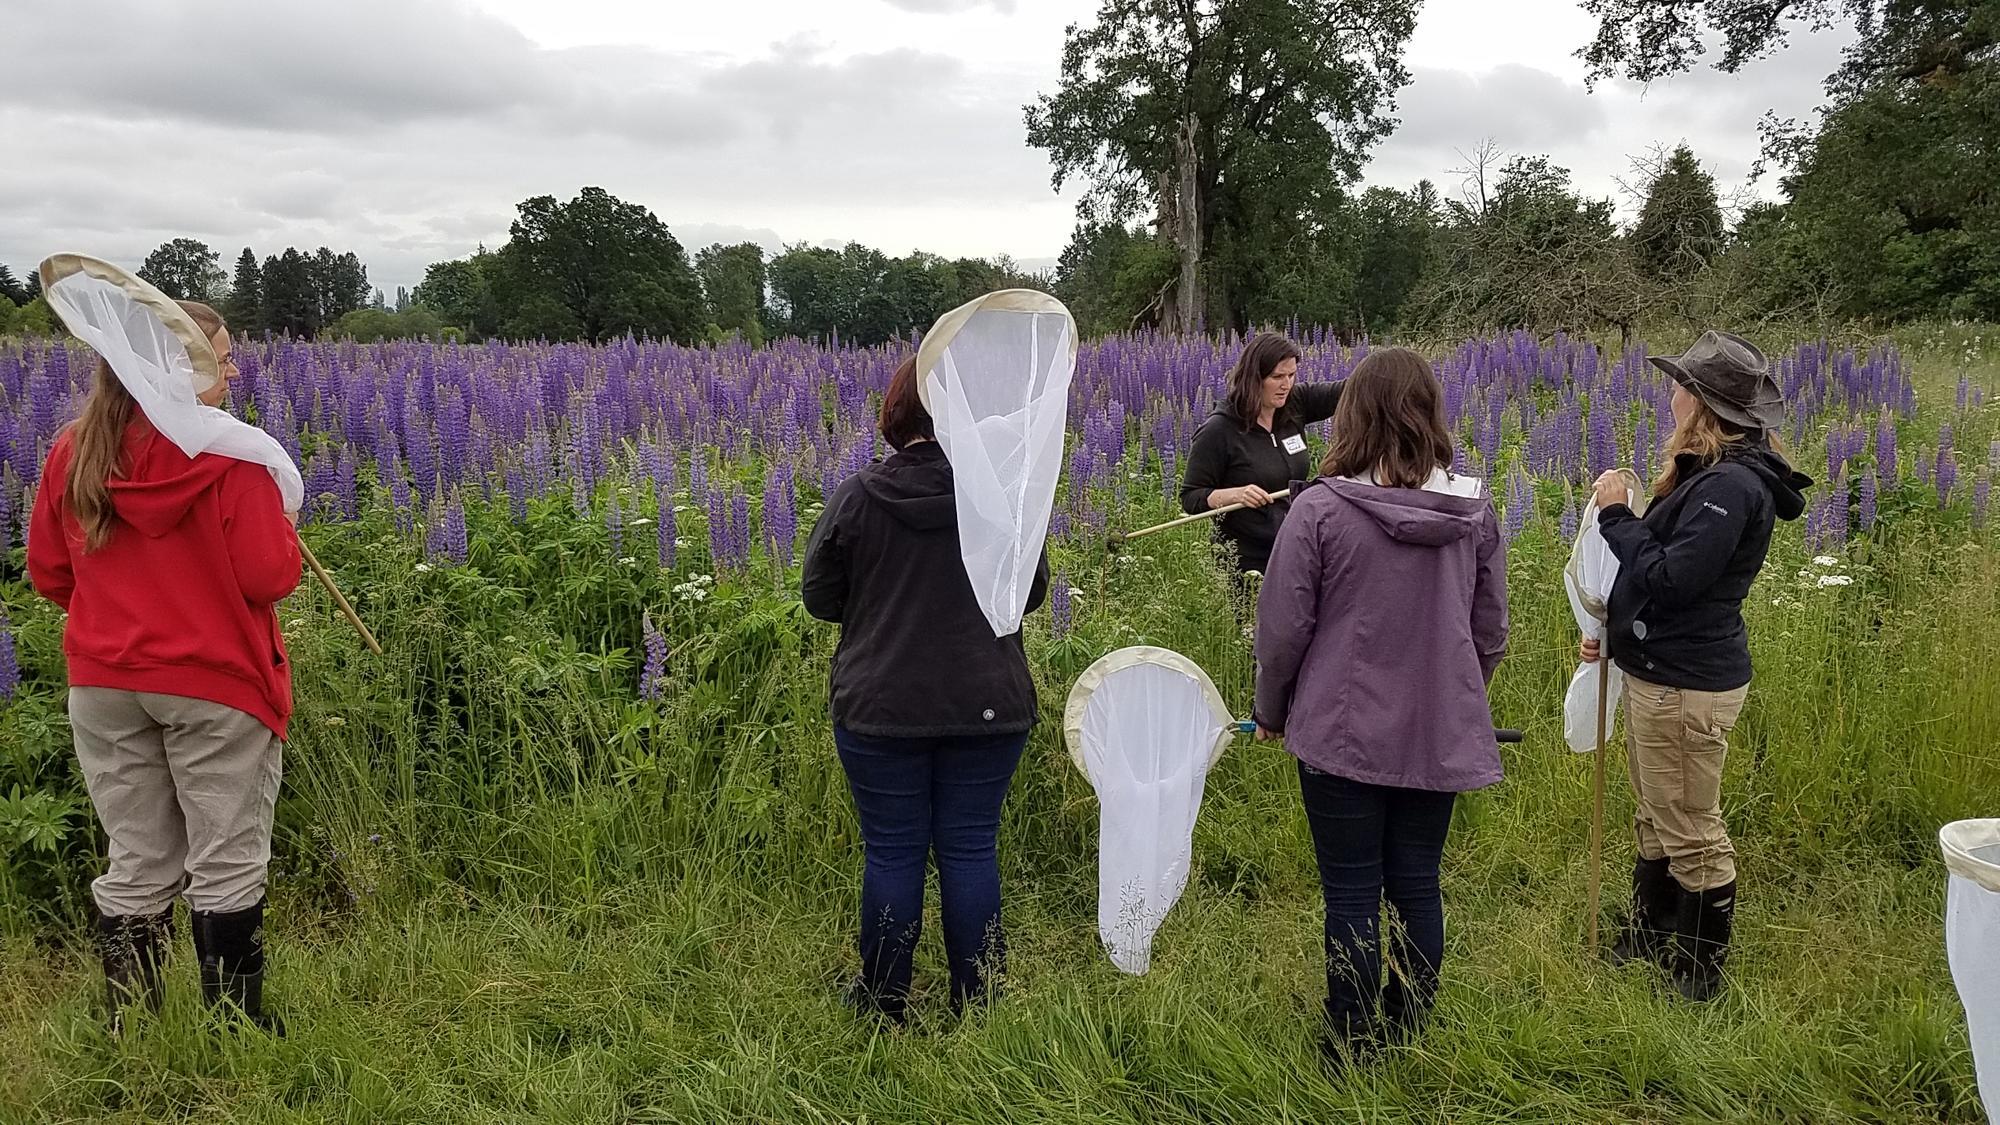 People walking around a lavender field with nets